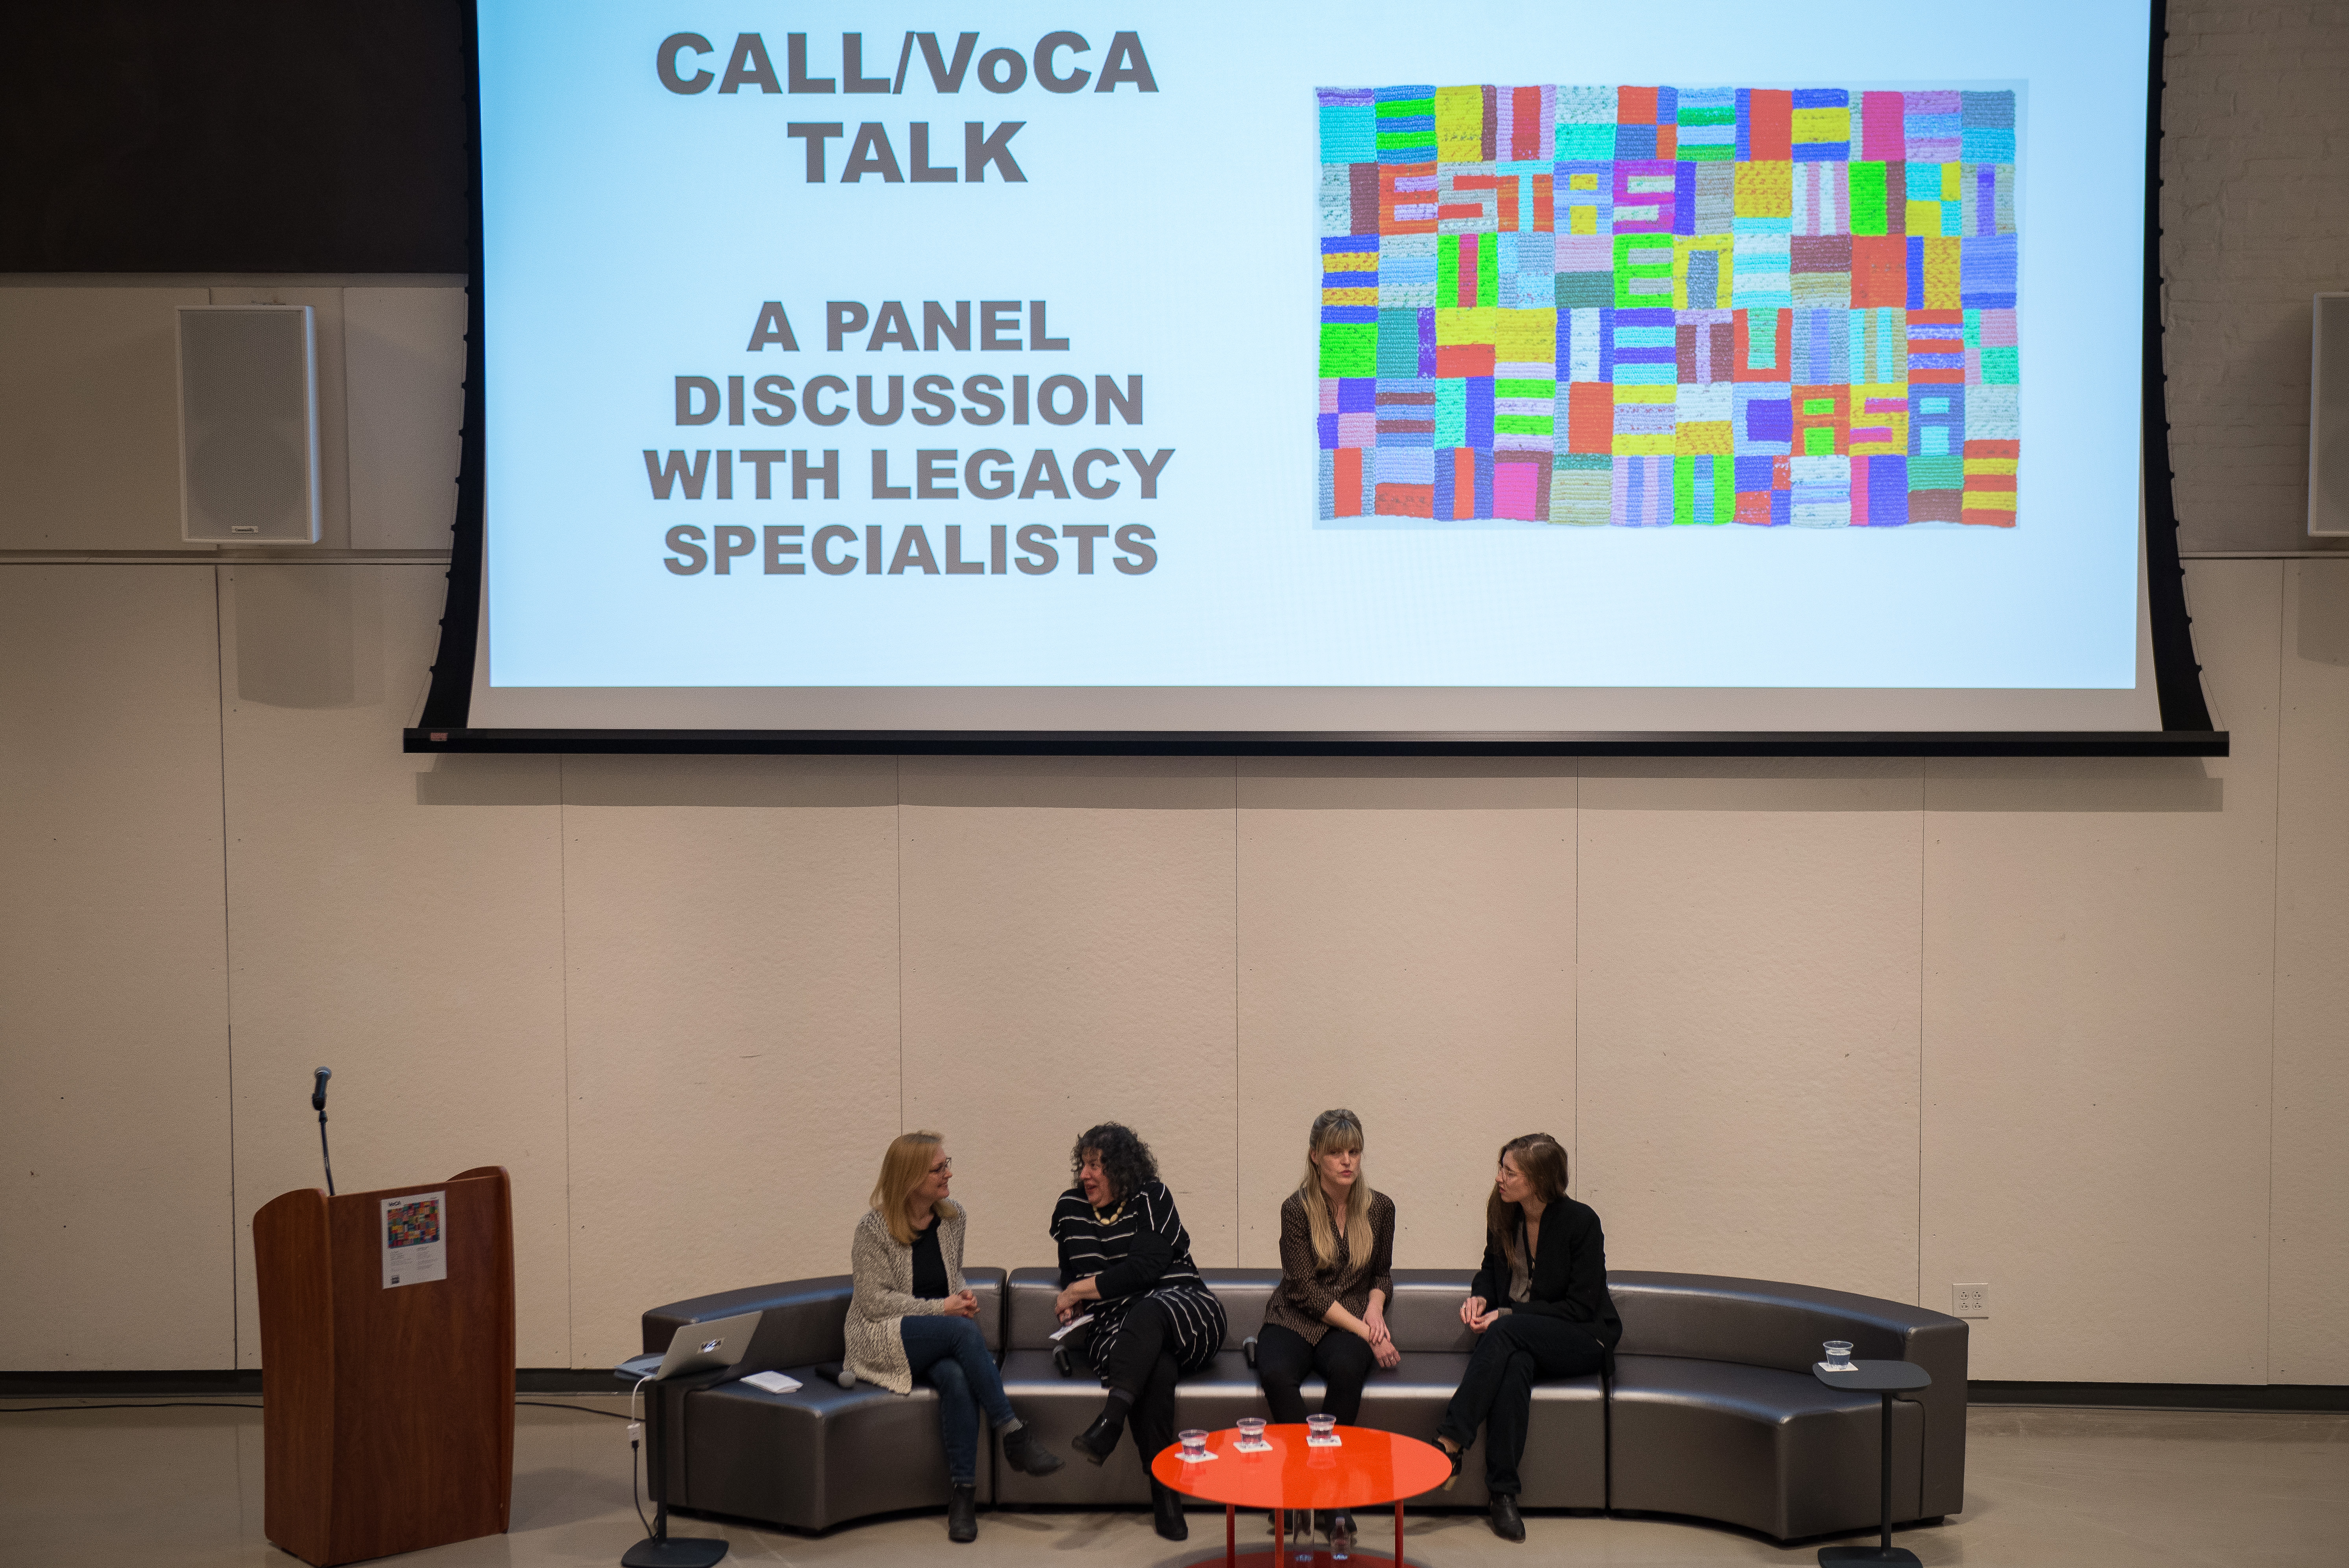 CALL/VoCA Talk, Contemporary Art, Joan Mitchell Foundation, Legacy Specialists